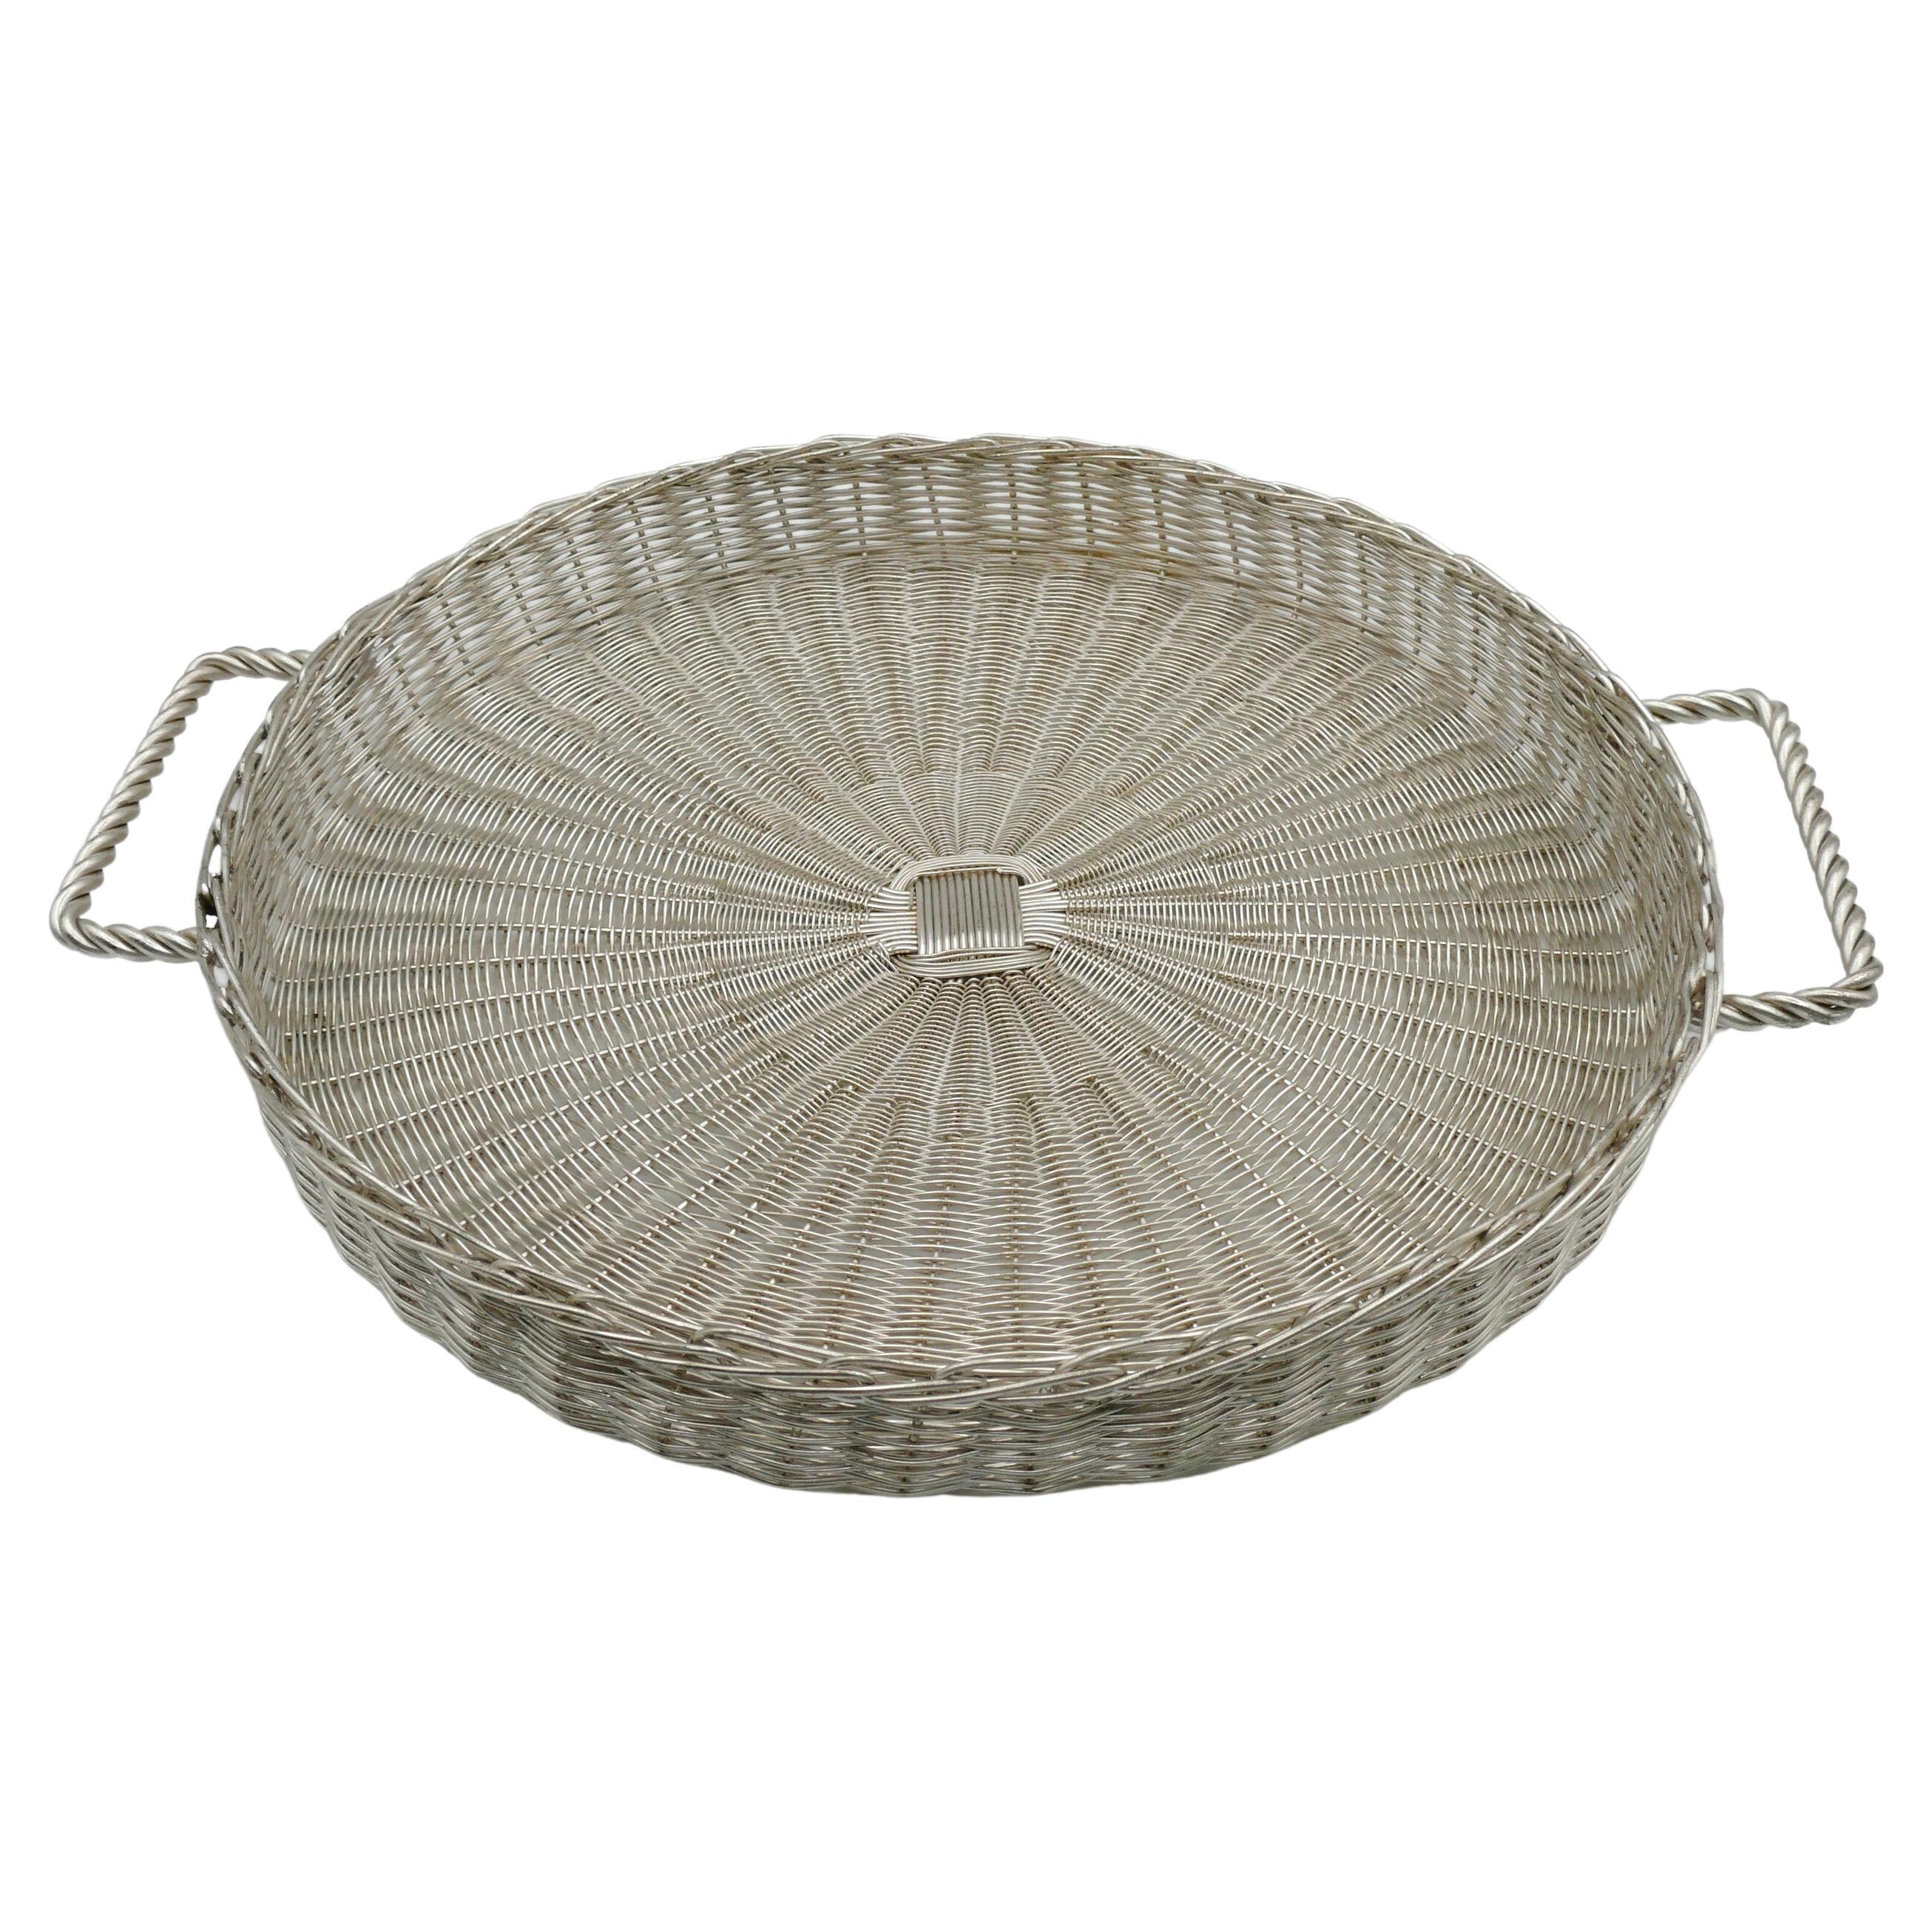 CHRISTIAN DIOR Home Collection Vintage Silver Plated Wicker Style Basket